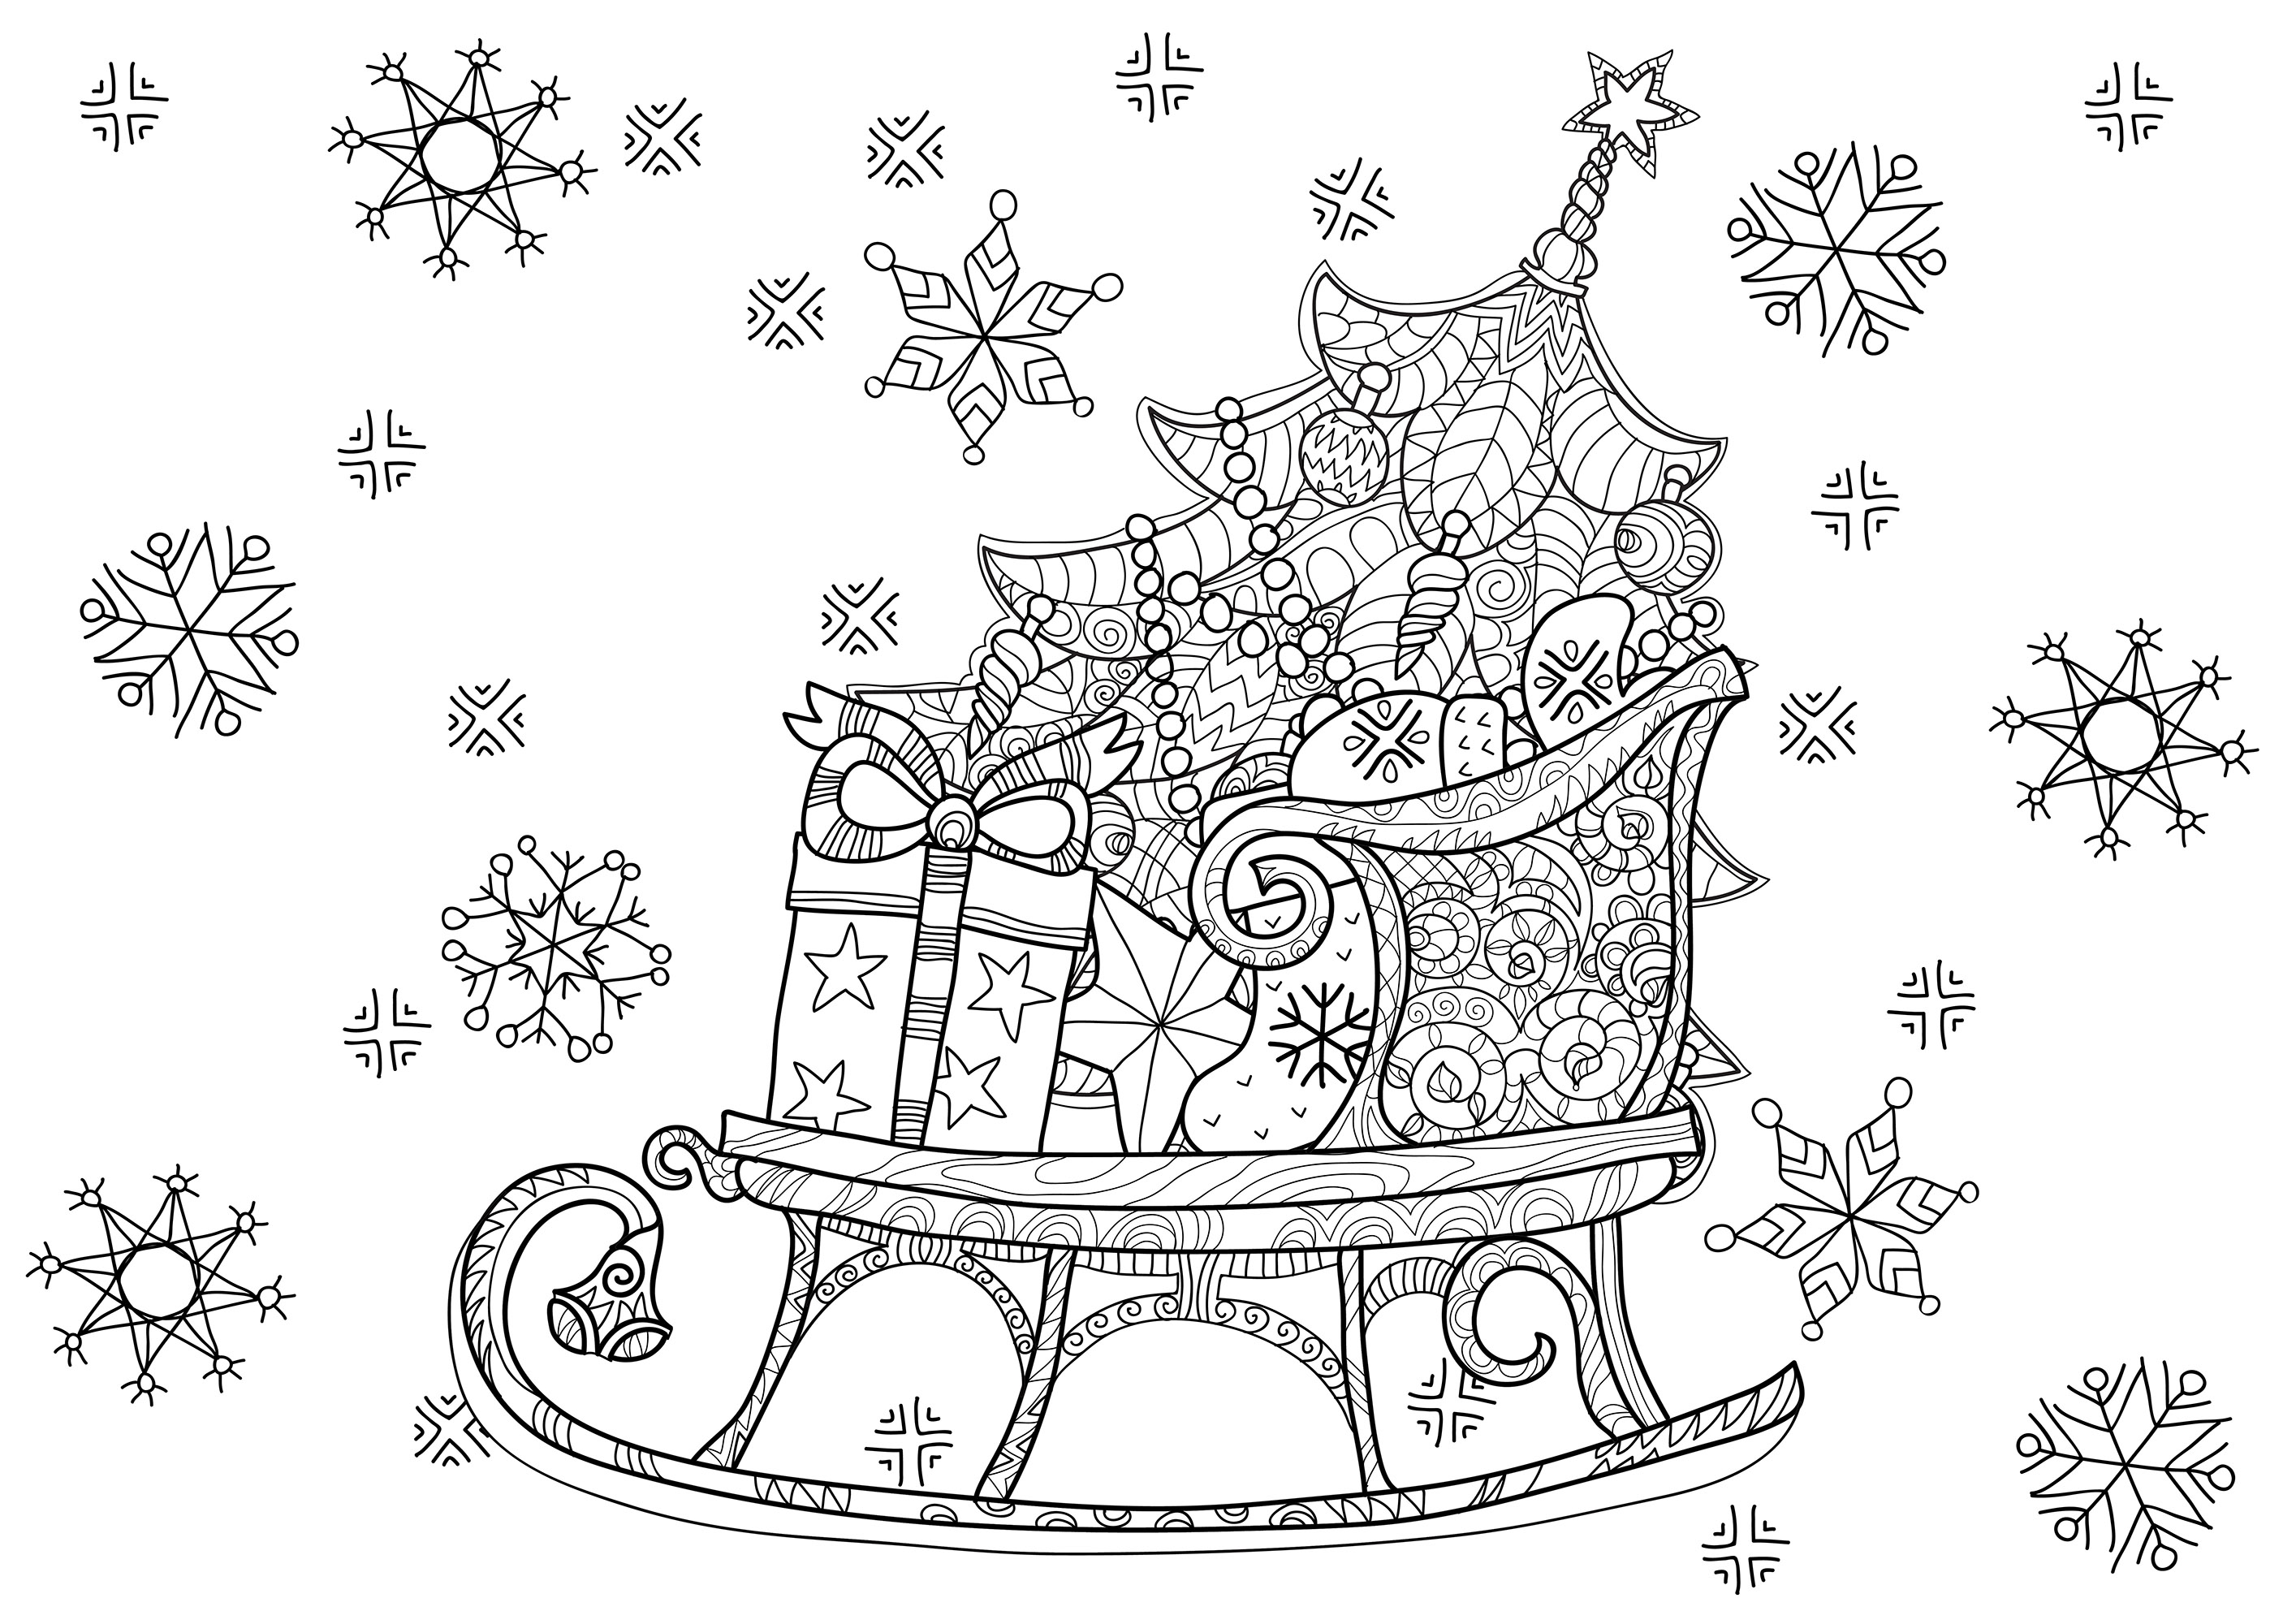 Santa's sleigh filled with gifts, also with a pretty, well-decorated Christmas tree, Source : 123rf   Artist : Yazzik